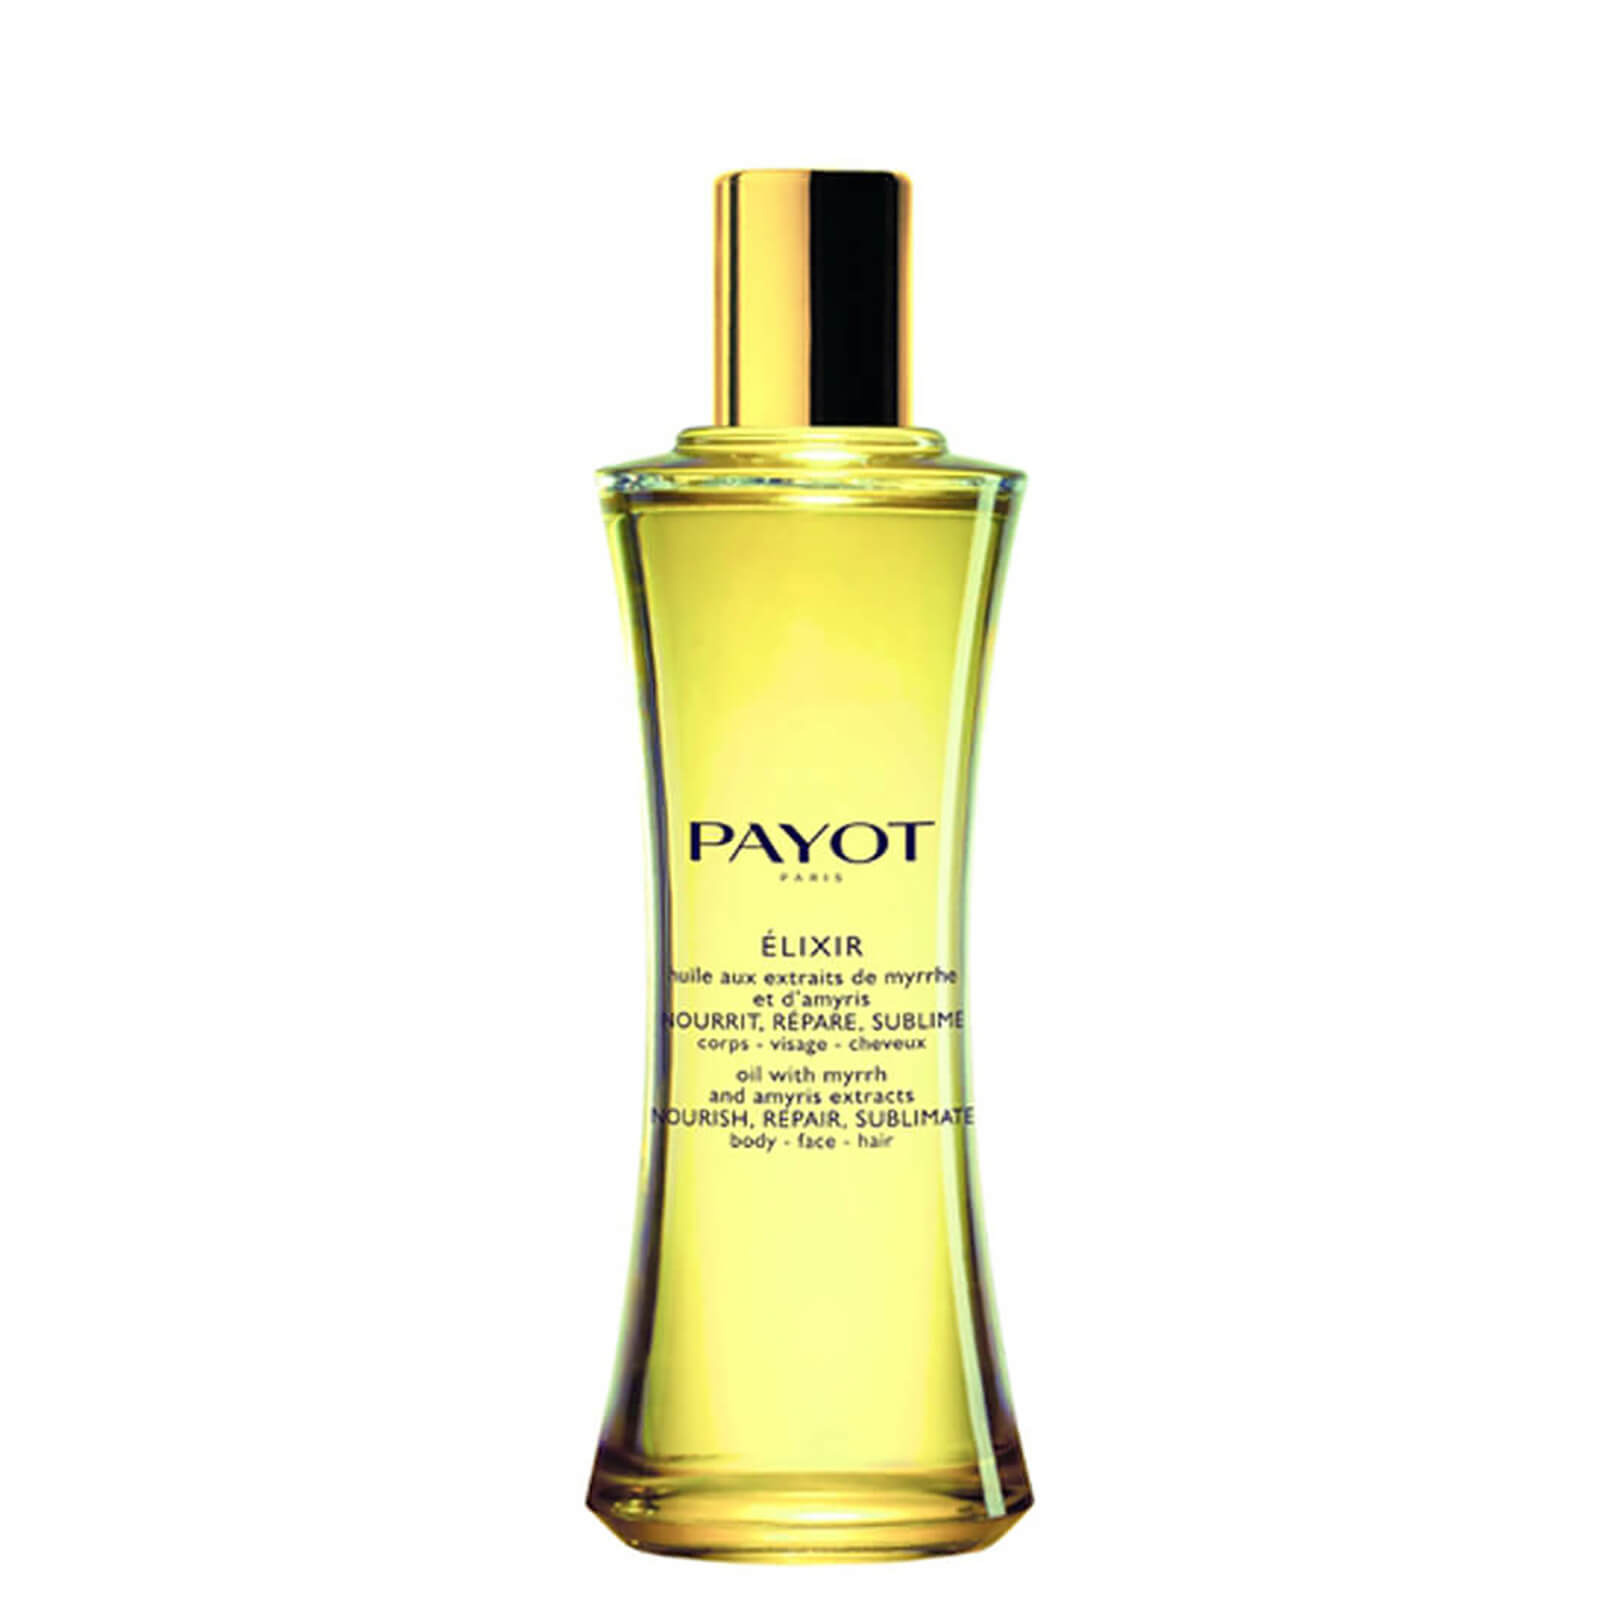 PAYOT Elixir Dry Oil For Body, Face and Hair 100ml | Buy Online At FacialCo